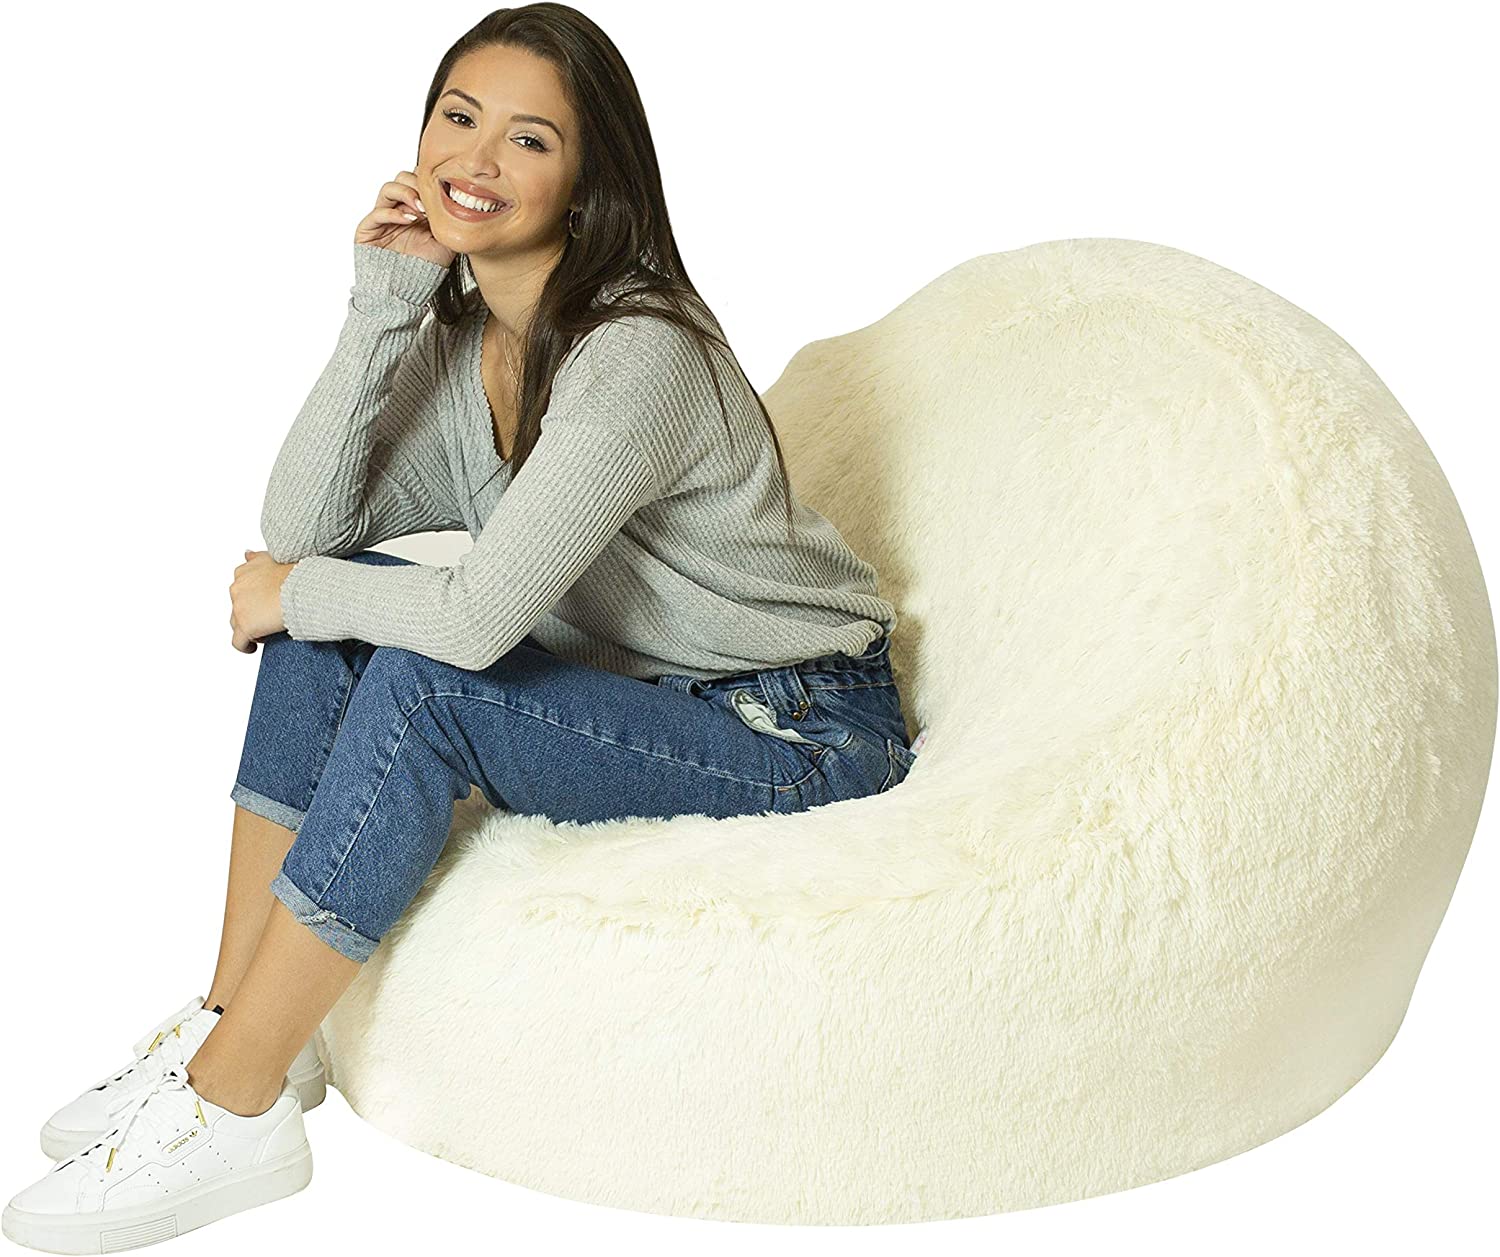 White Inflatable Chair, Premium Quality, Softer, Fluffier Fur, Contemporary Accent Chair for Bedroom, Dorm, Living Room, Gaming, Removable and Washable Fur Cover（1 chair） - KAMO